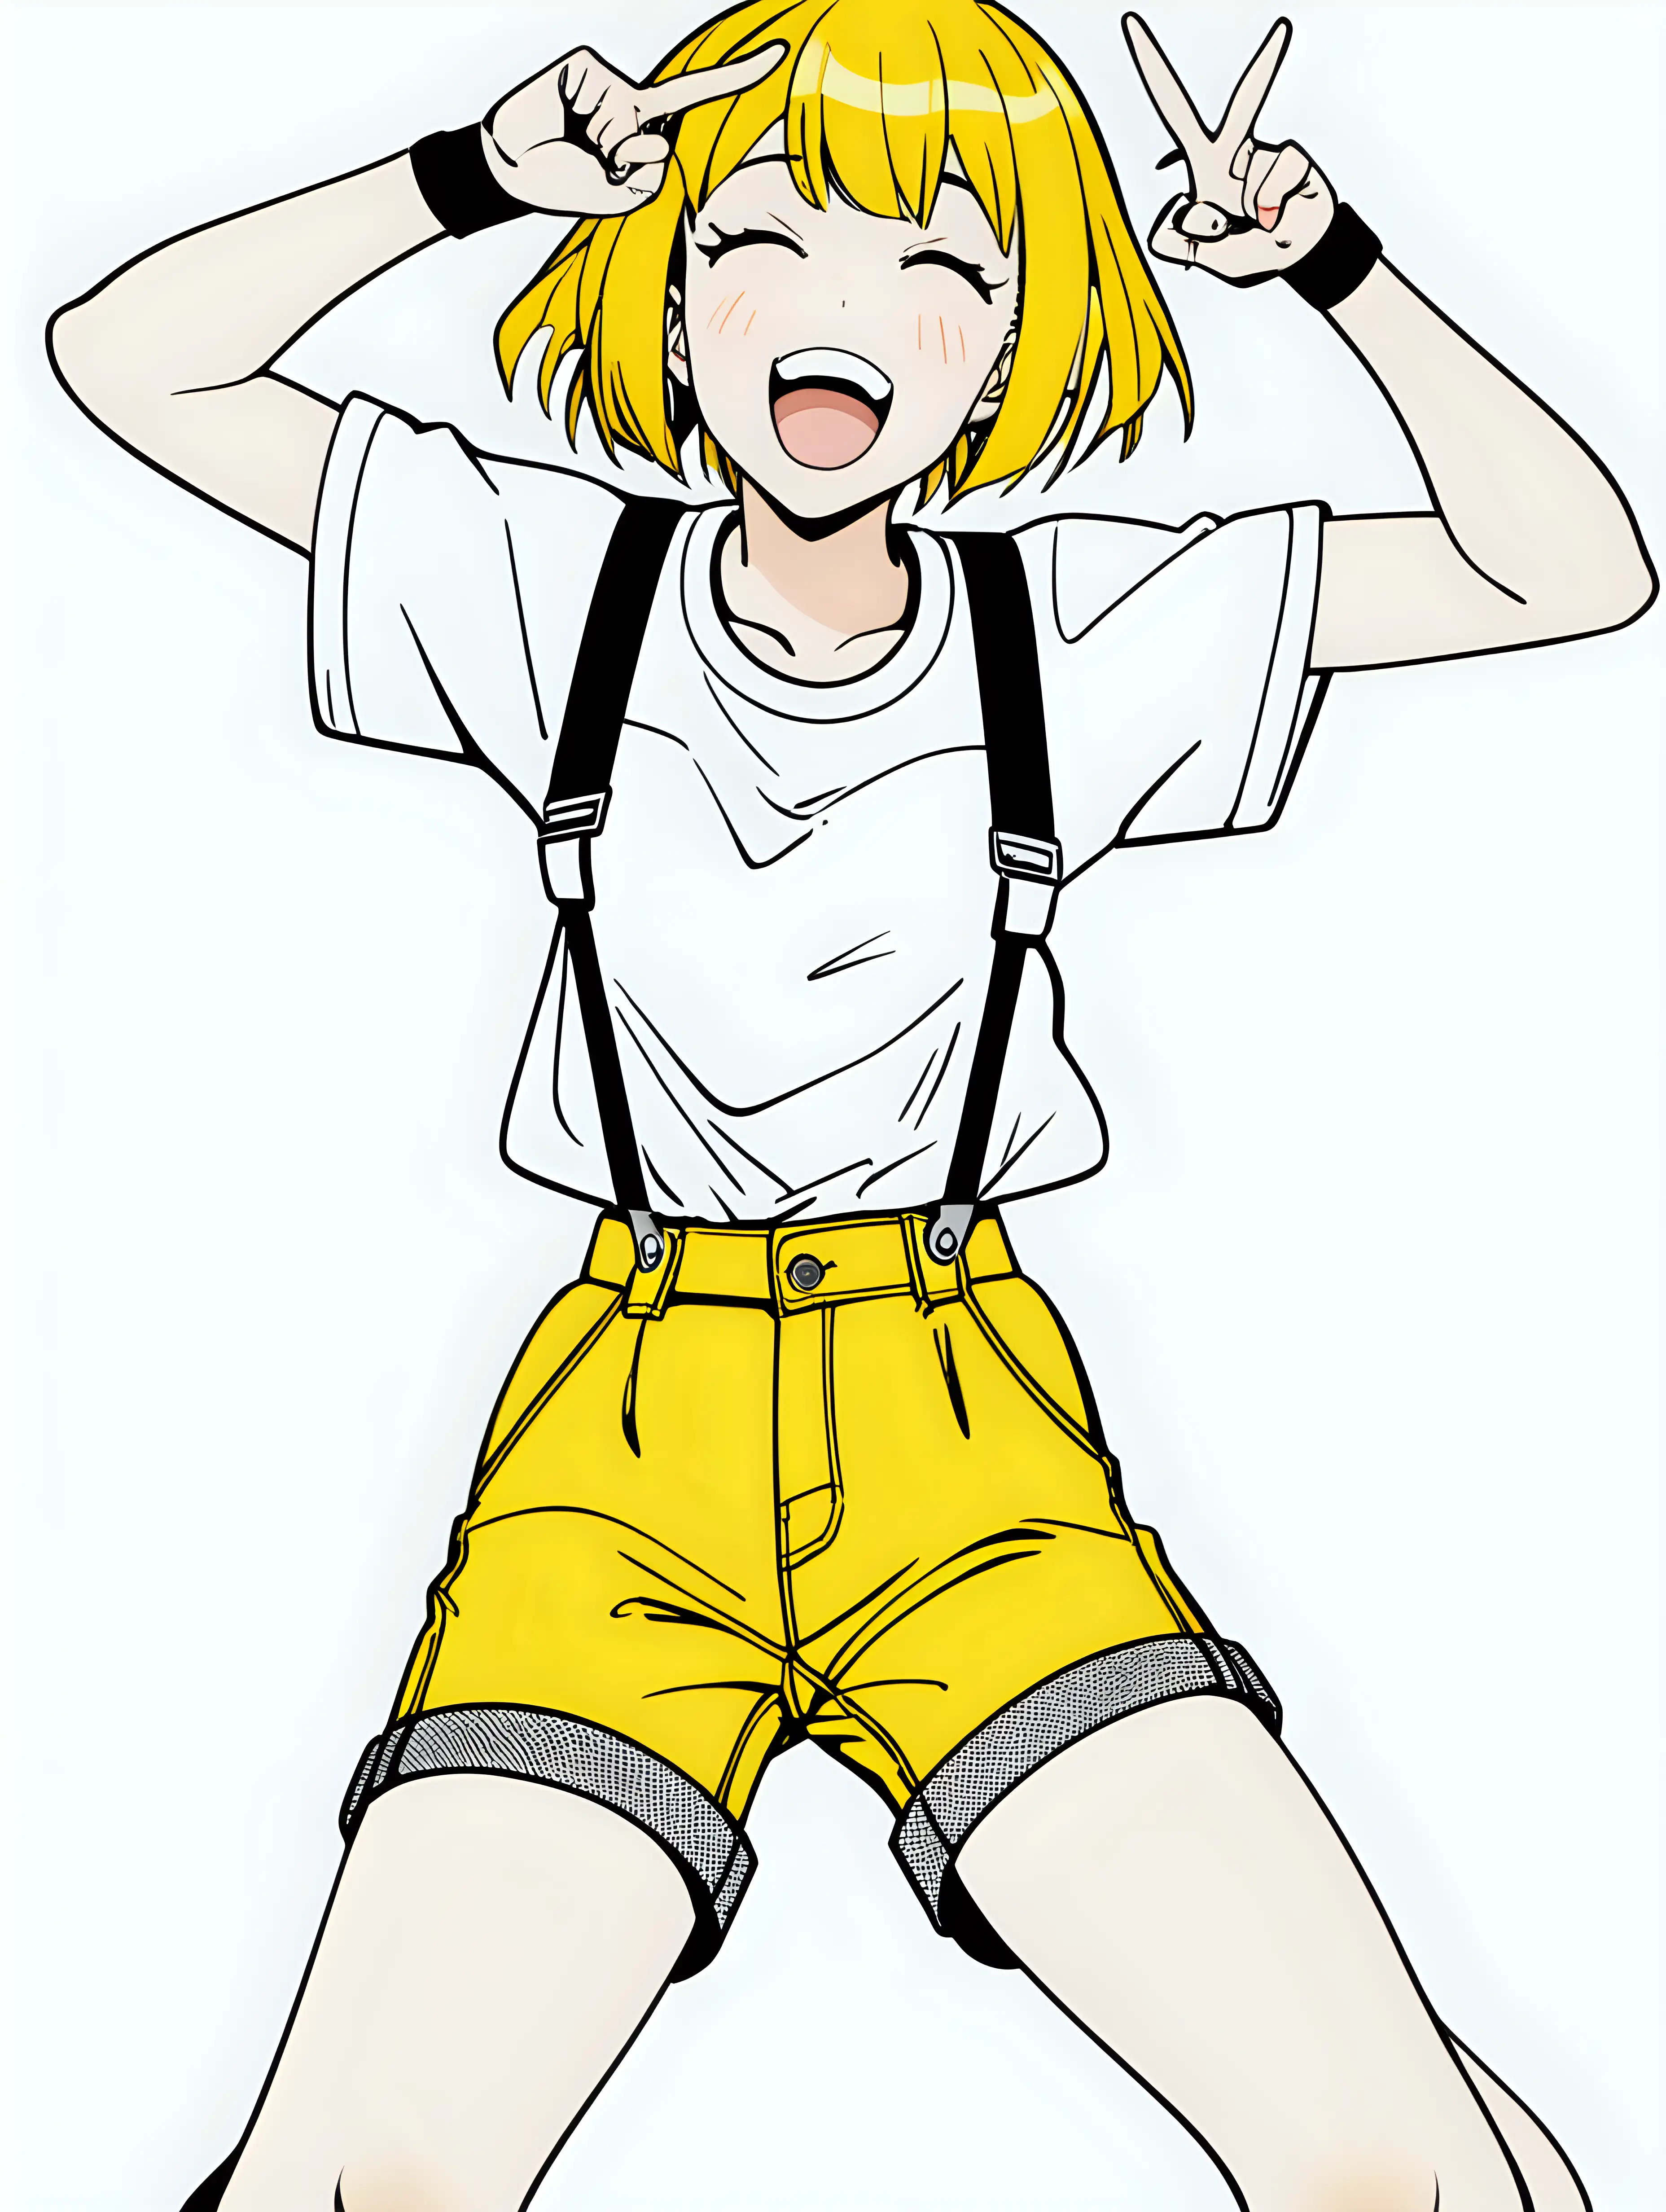 Anime Adult Girl Hero in Yellow Shorts and Suspenders Posterized Design